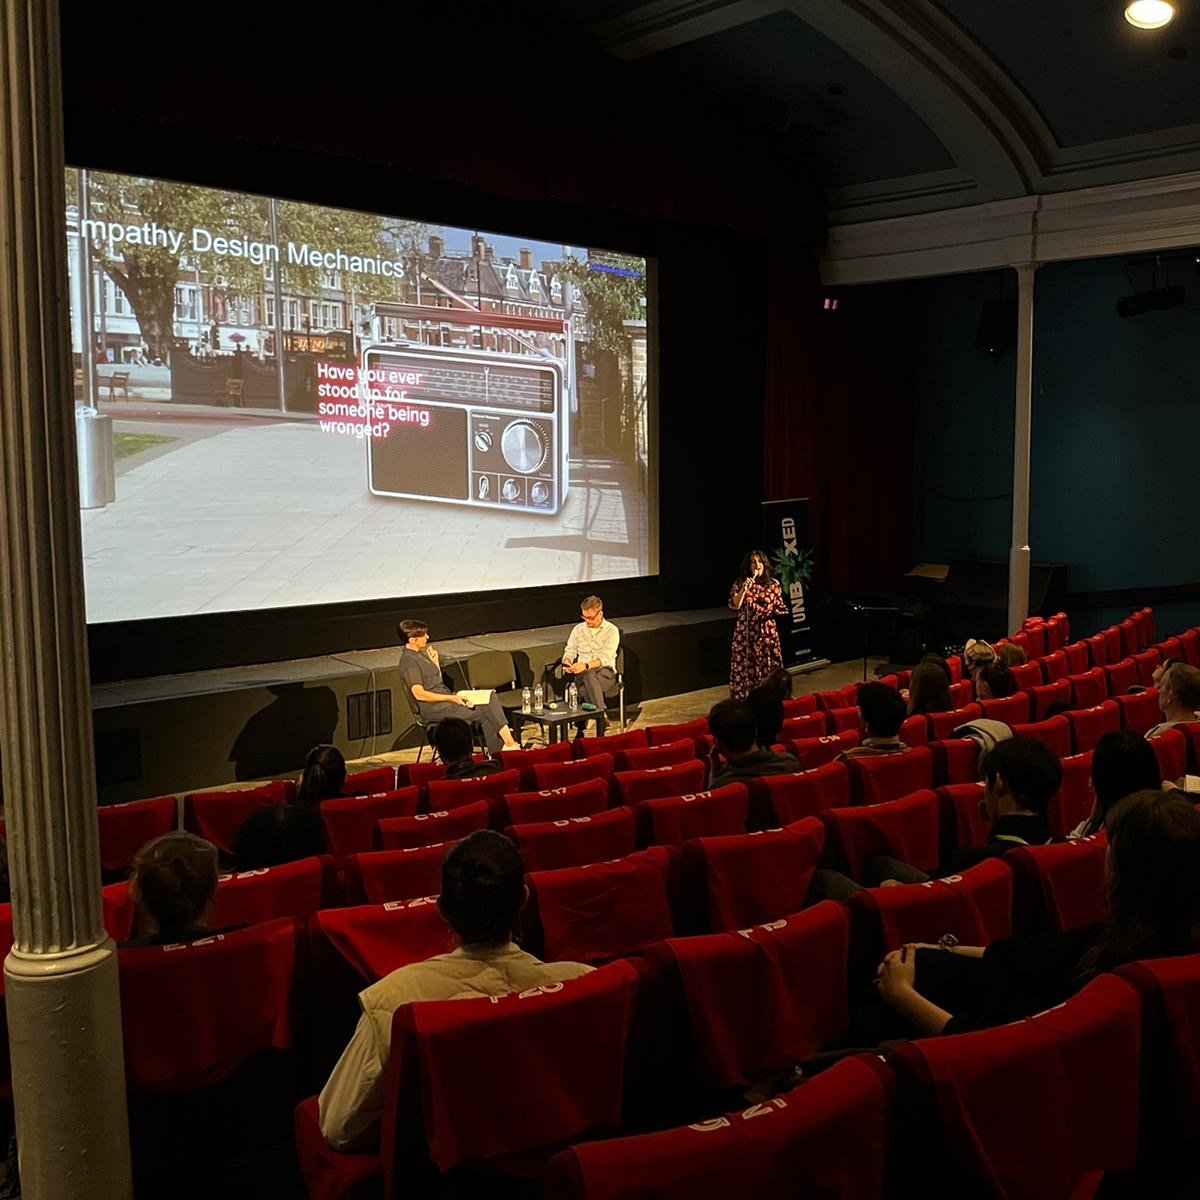 It's Day 1 of the #EIFF22 industry programme! First up we had a case study with @Back2BackTheatr looking at their progressive work practice. And right now at @Filmhouse is an event exploring new ways of filmic communication looking at two projects commissioned by @unboxed2022